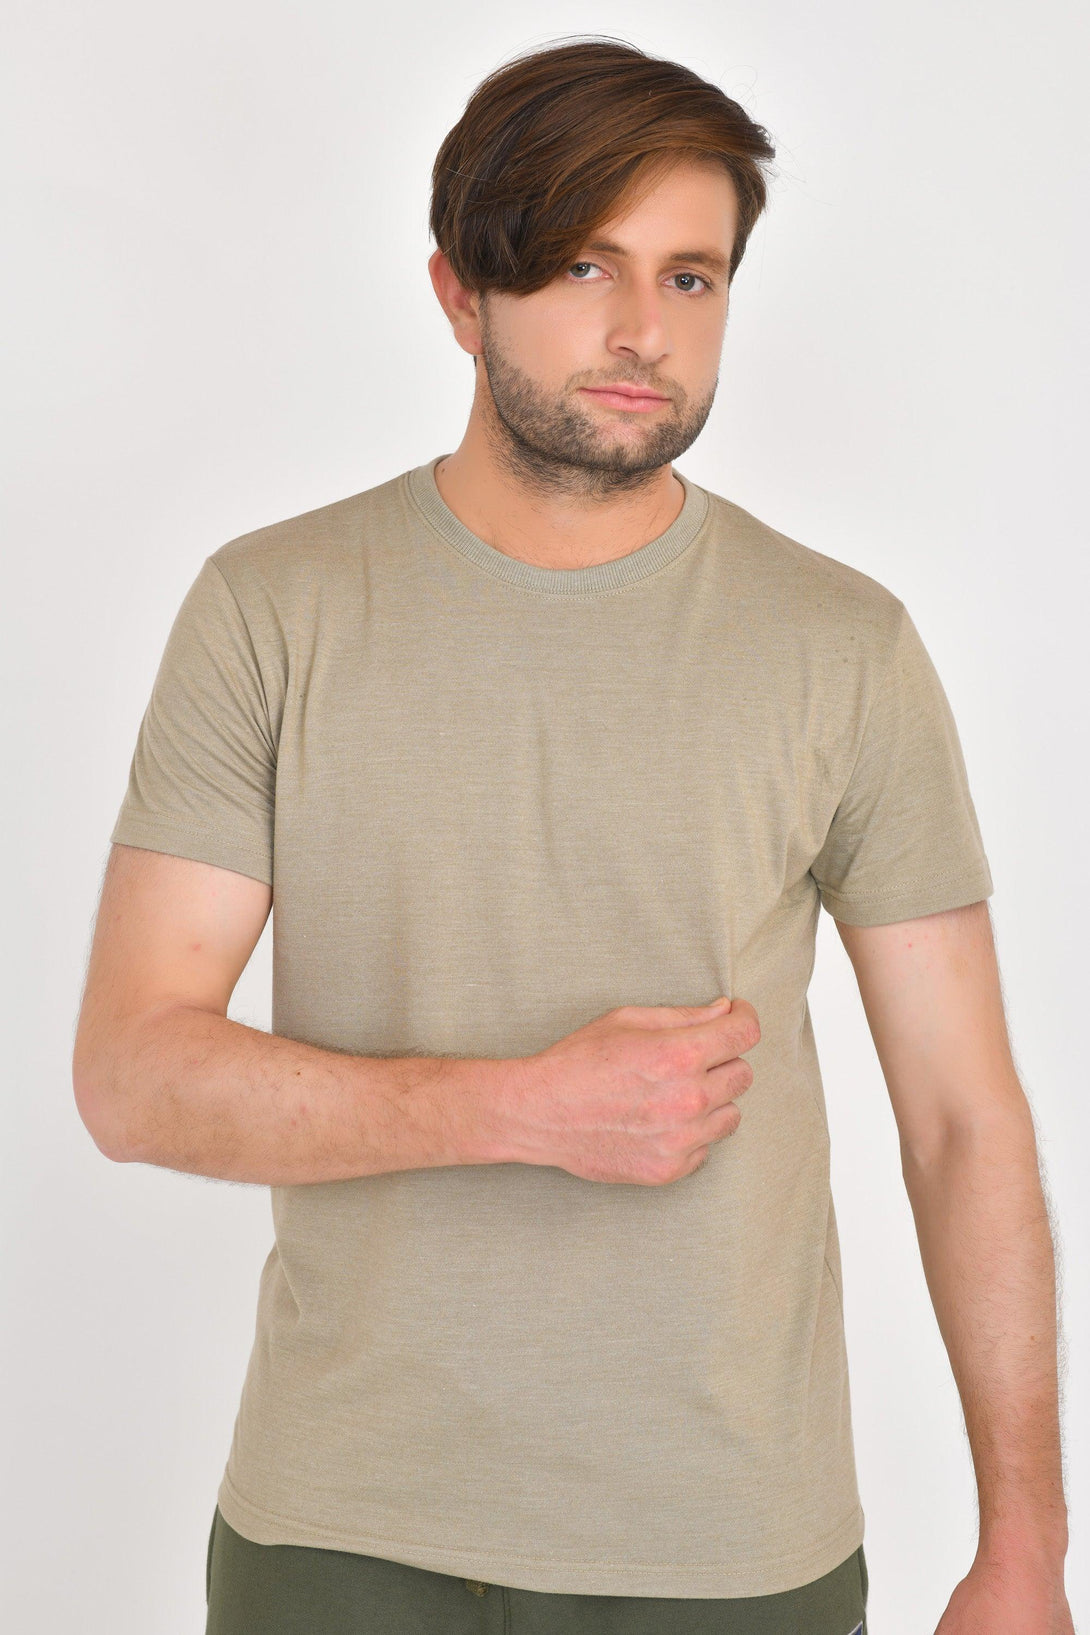 Round Neck T-Shirts | LAGOON - STONE - TAN - Pack of 3 - FTS